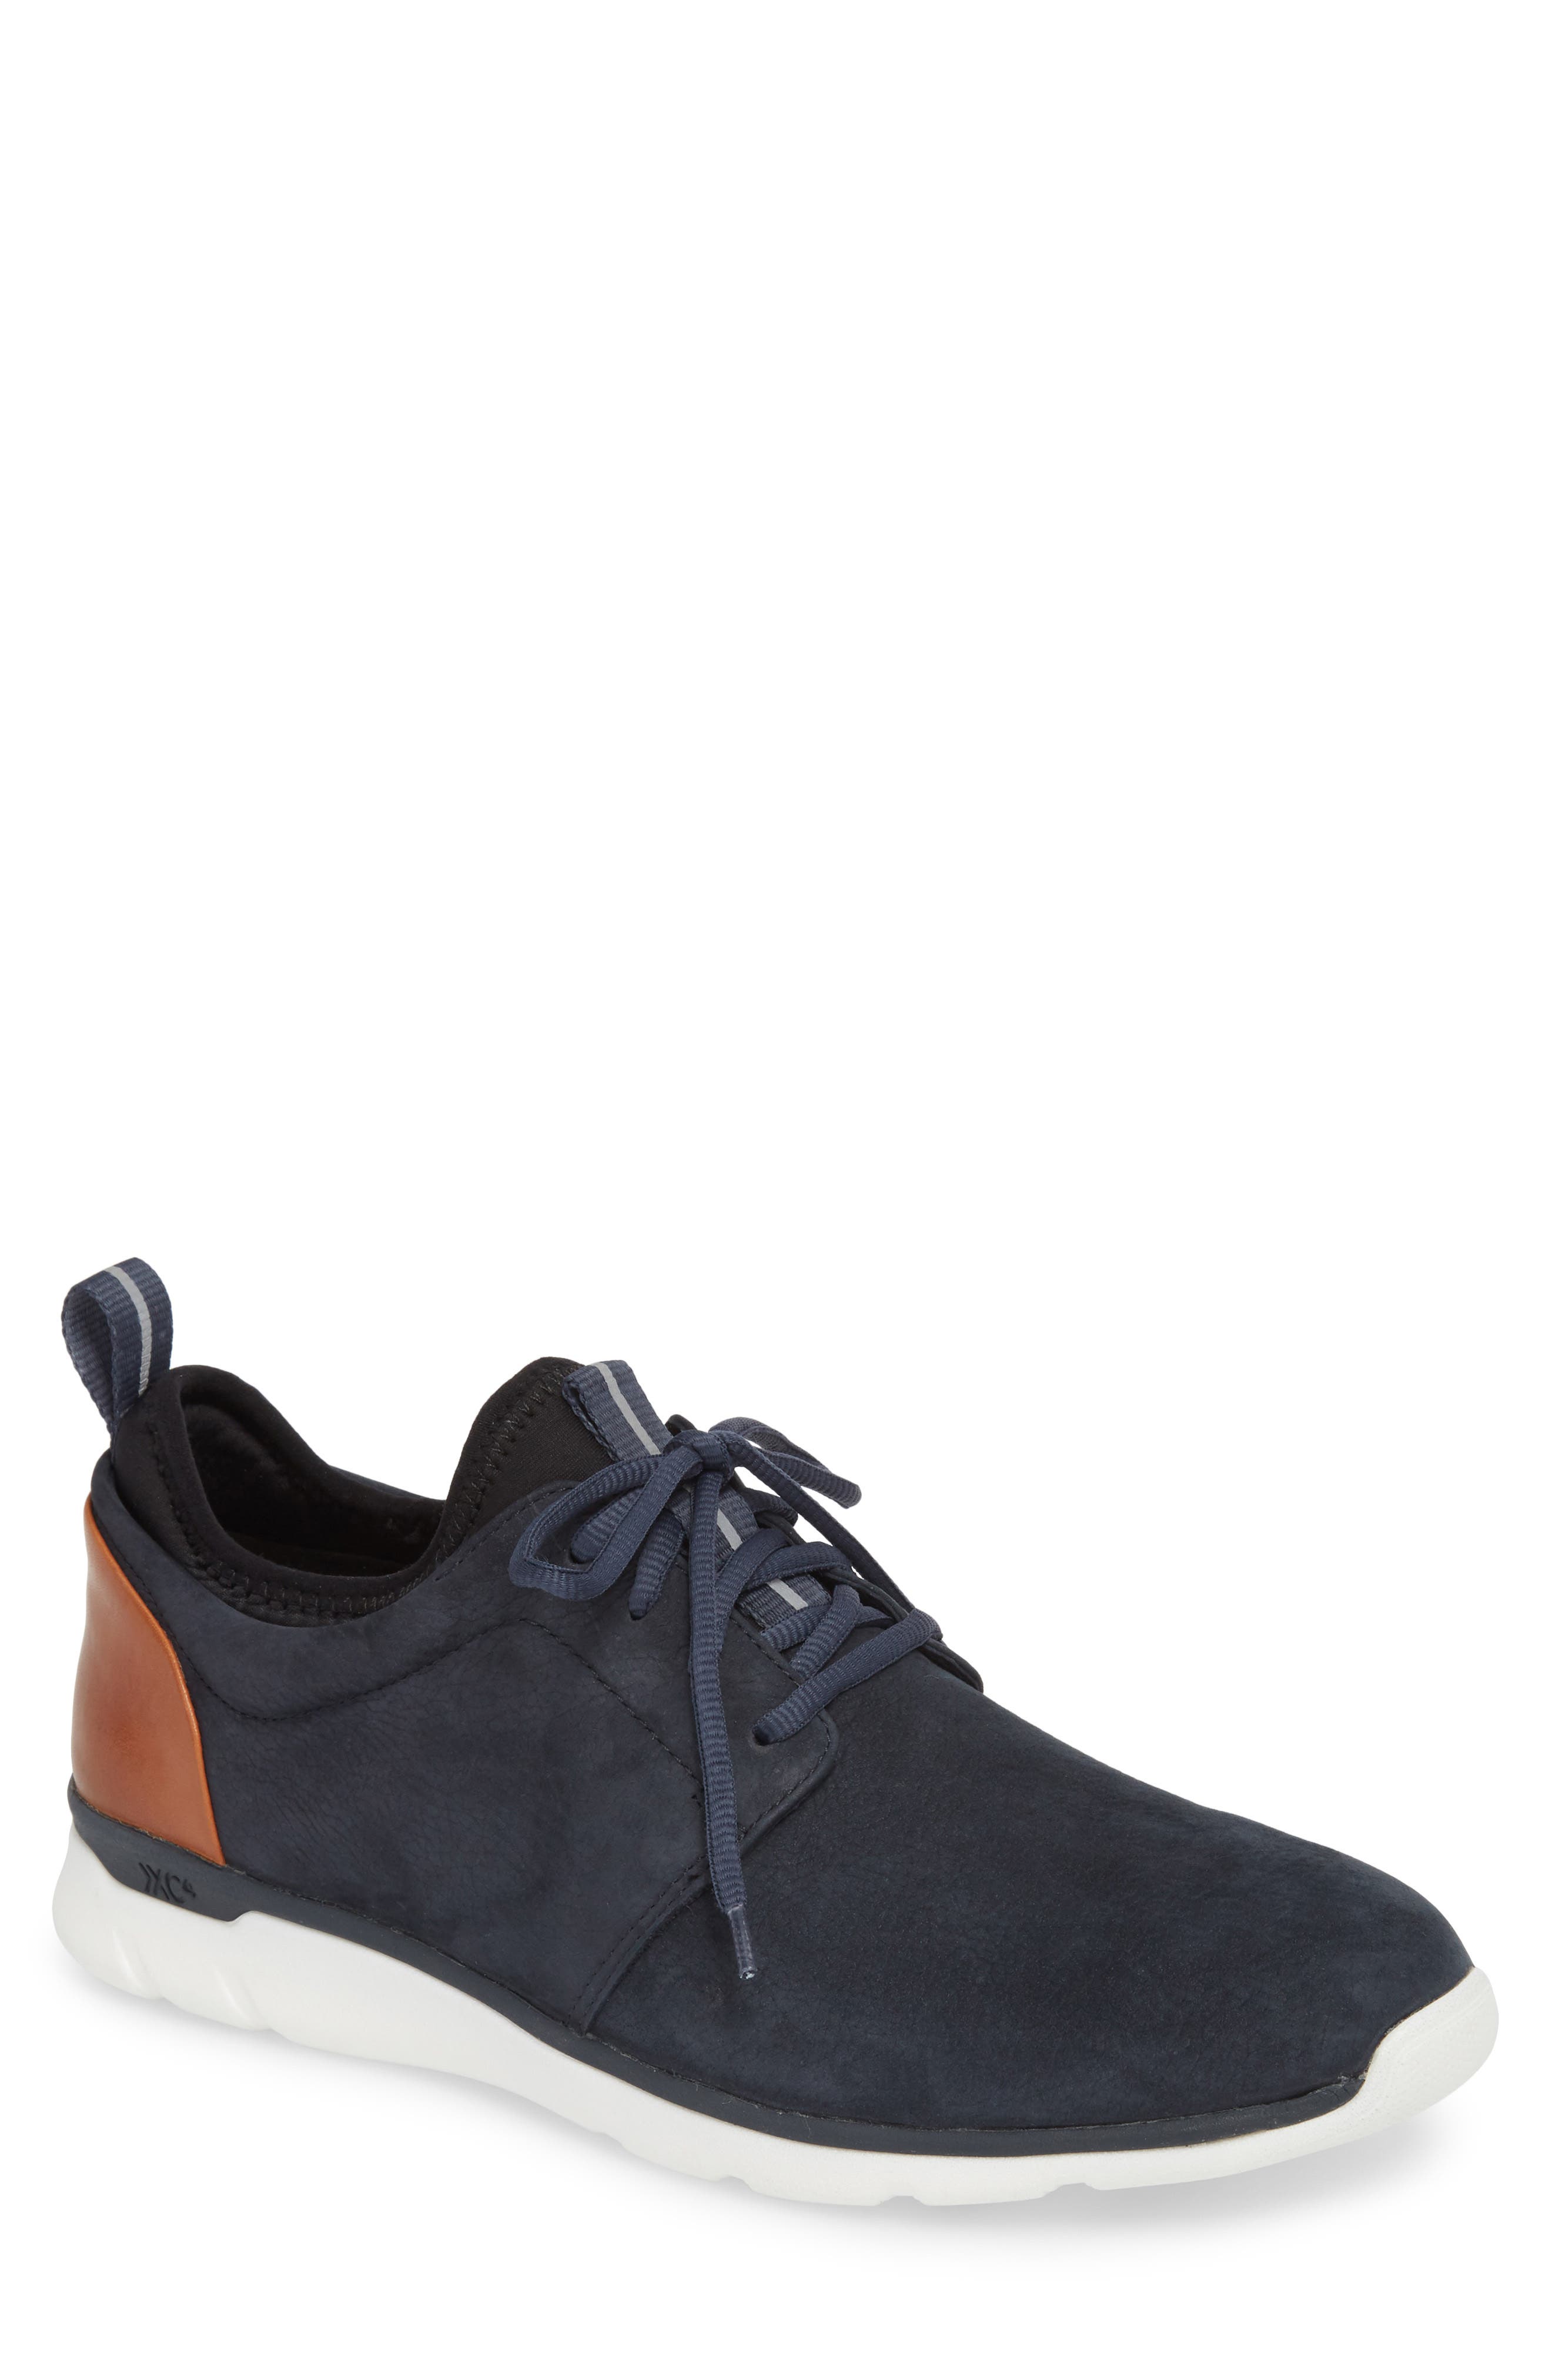 johnston and murphy dress sneakers